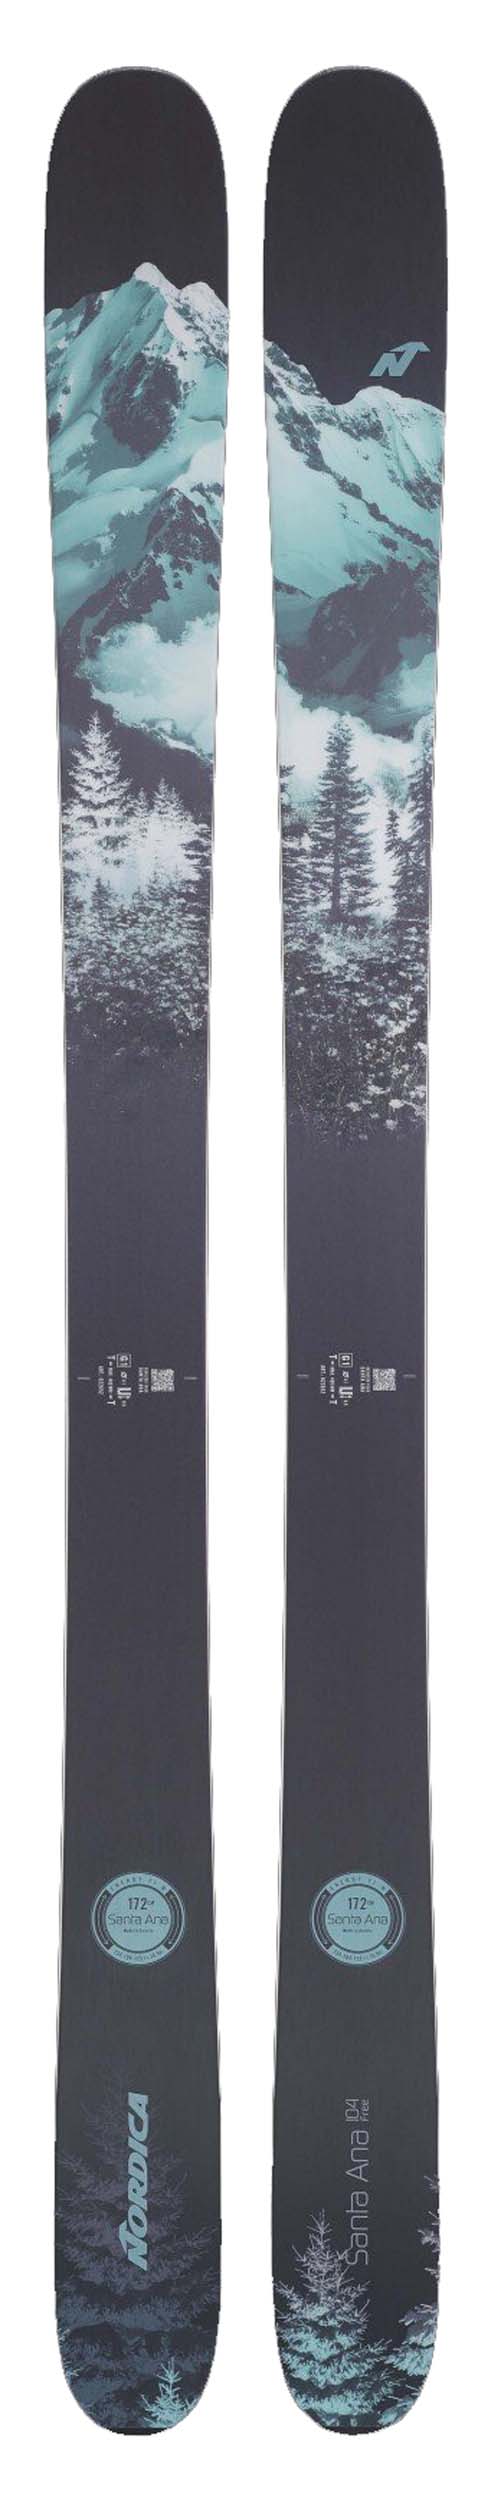 Nordica 2022 Santa Ana Free 104 Skis (Without Bindings / Flat) NEW !!  165cm